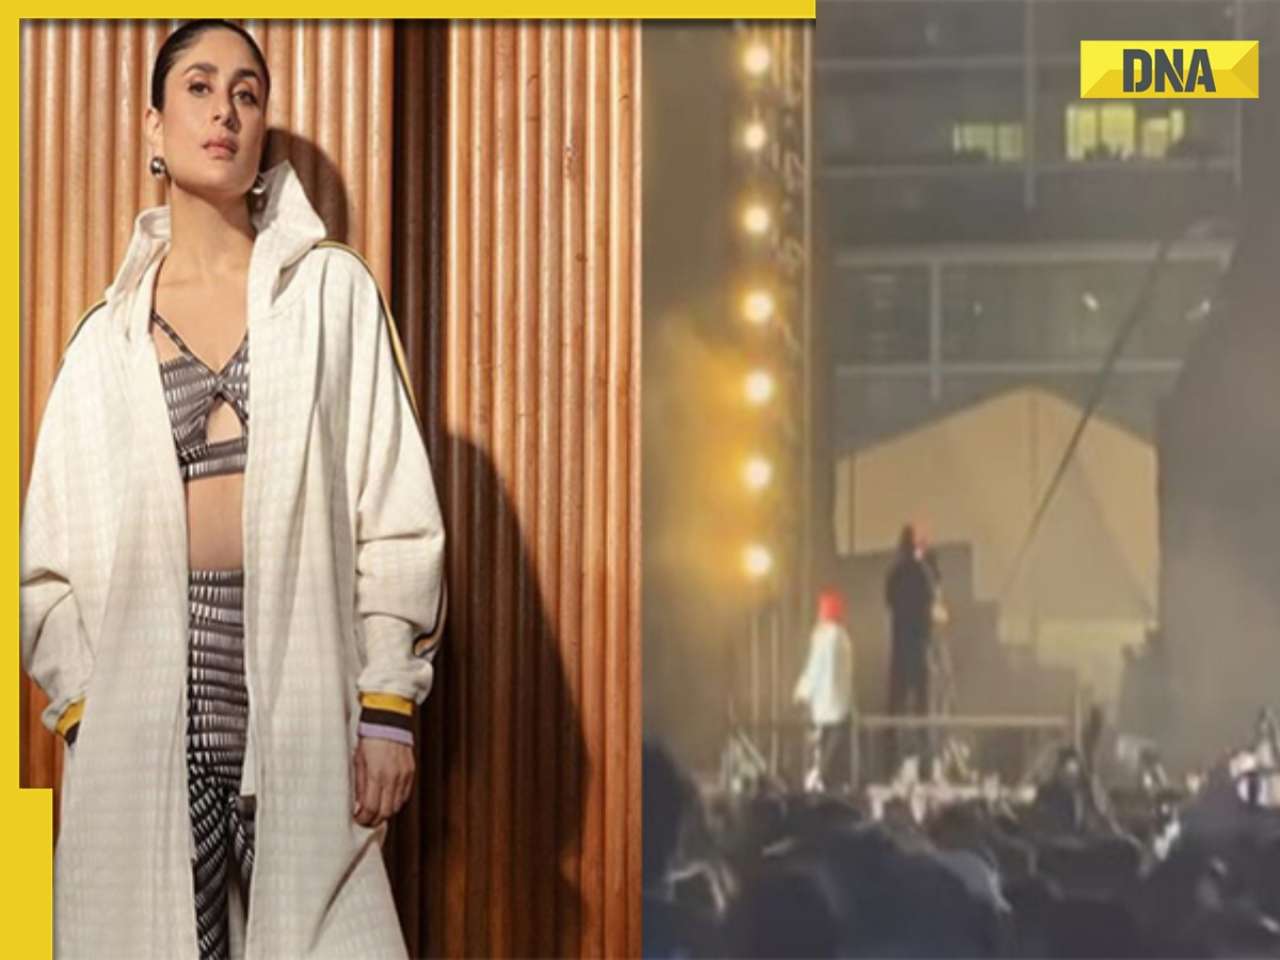 Kareena Kapoor reacts after Diljit Dosanjh gives her a shoutout at live concert in viral video